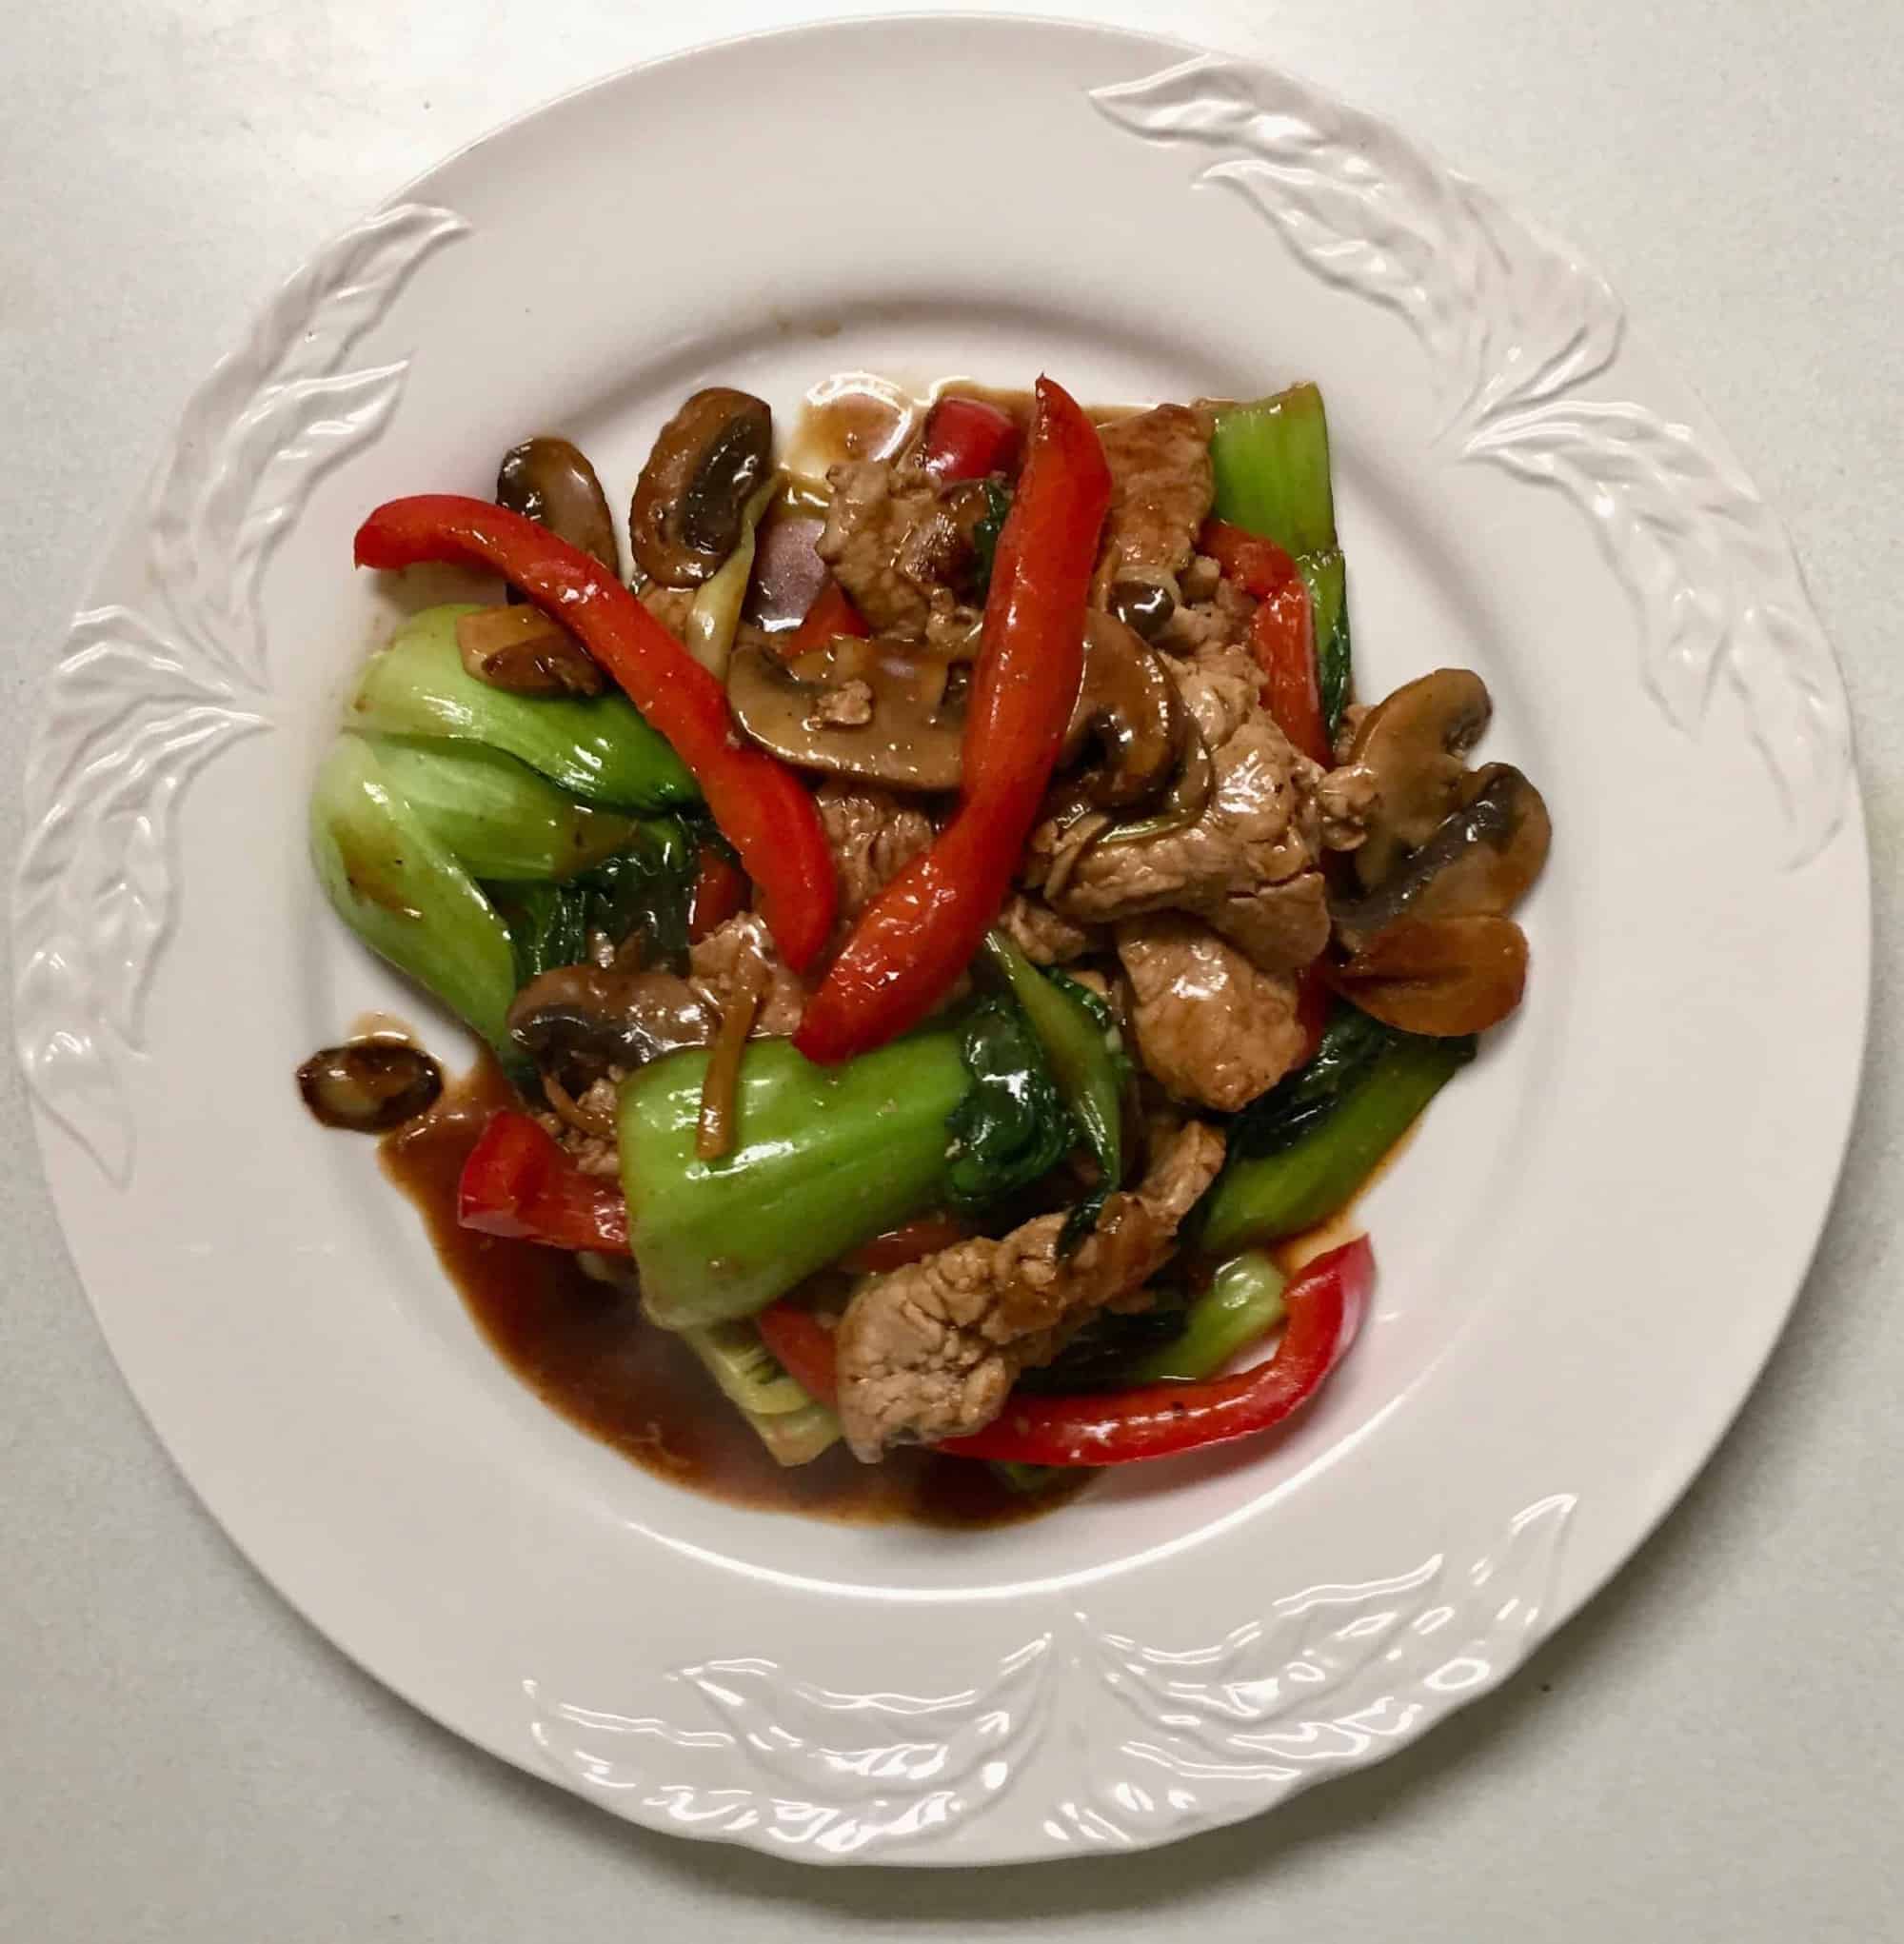 Pork Stir Fry with Bok Choy, Red Peppers and Mushrooms